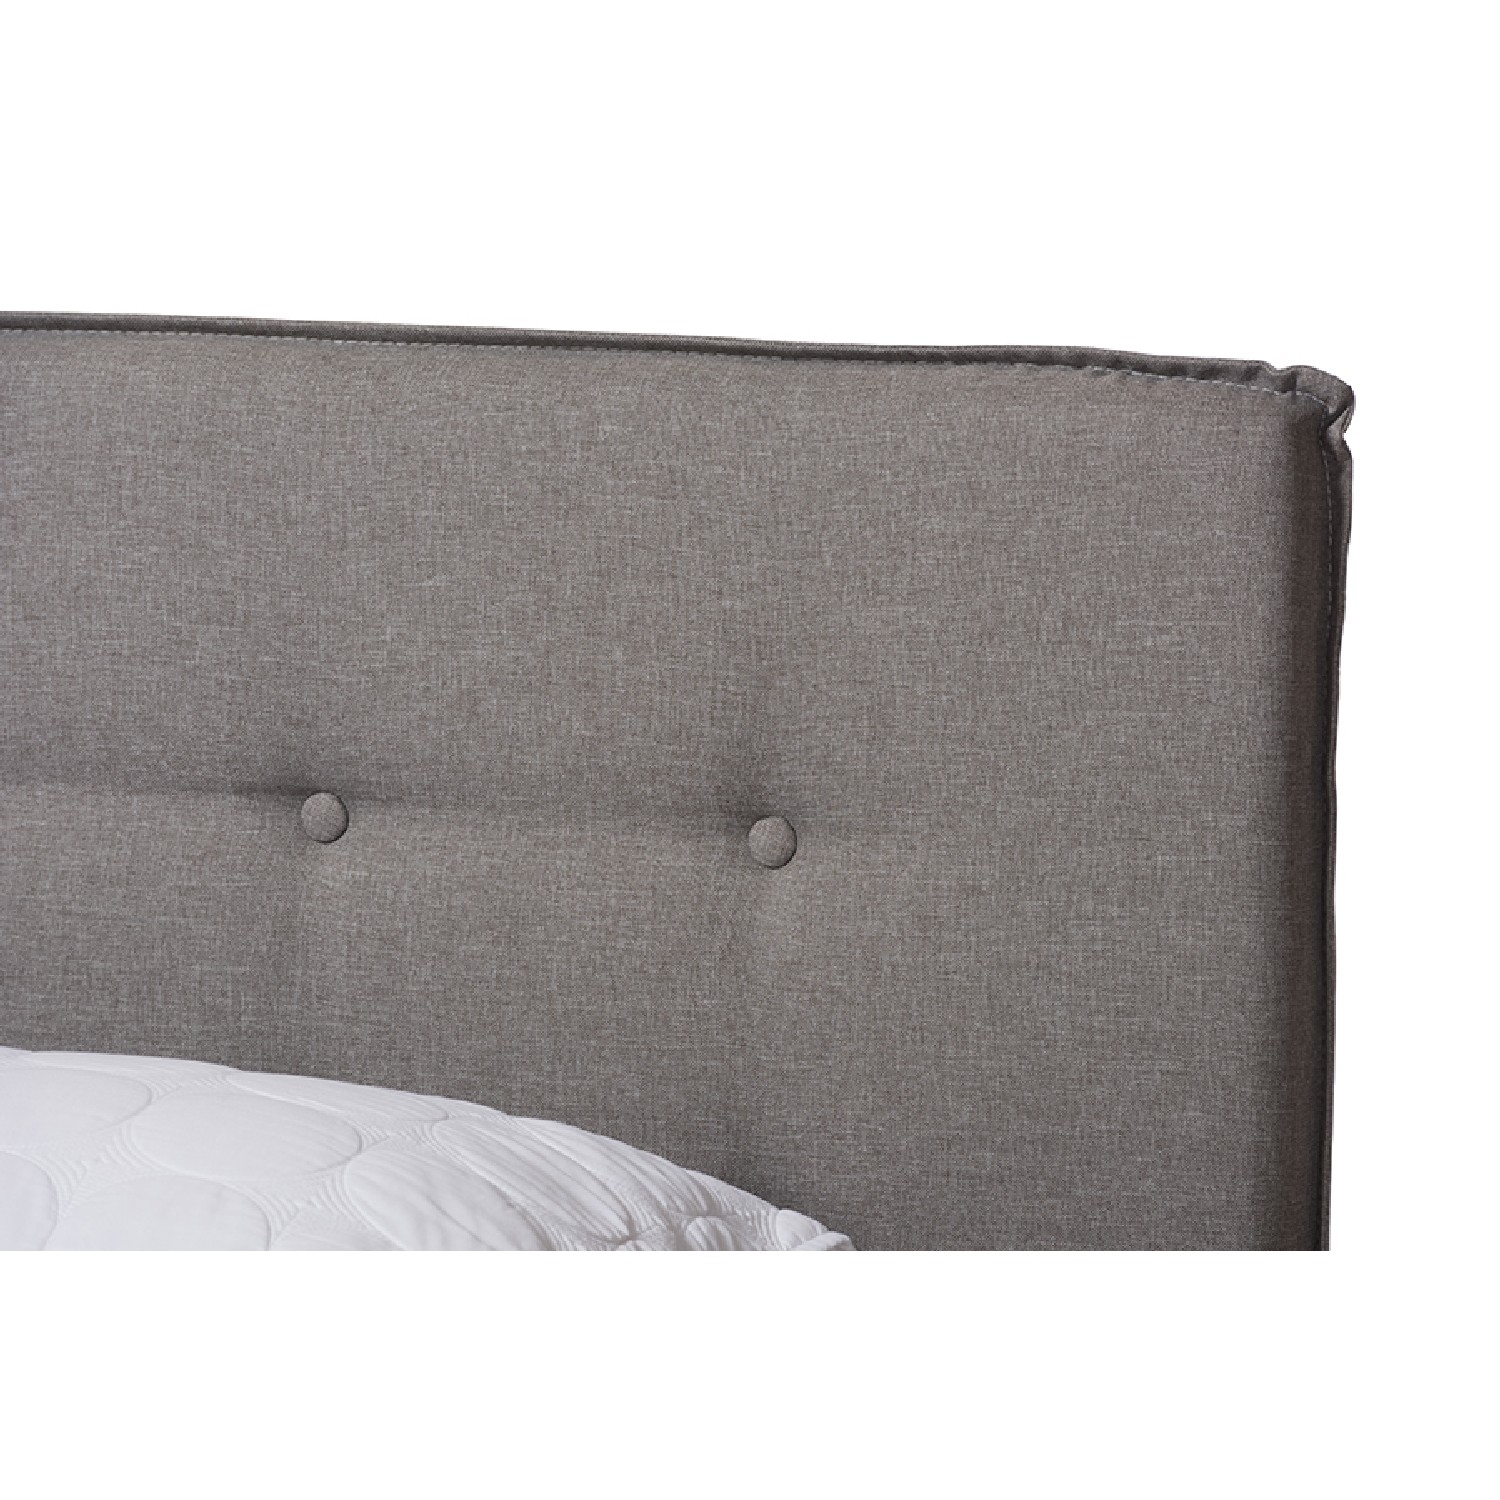 Baxton Studio Audrey Modern and Contemporary Upholstered Bed, Multiple Sizes, Multiple Colors - image 4 of 7